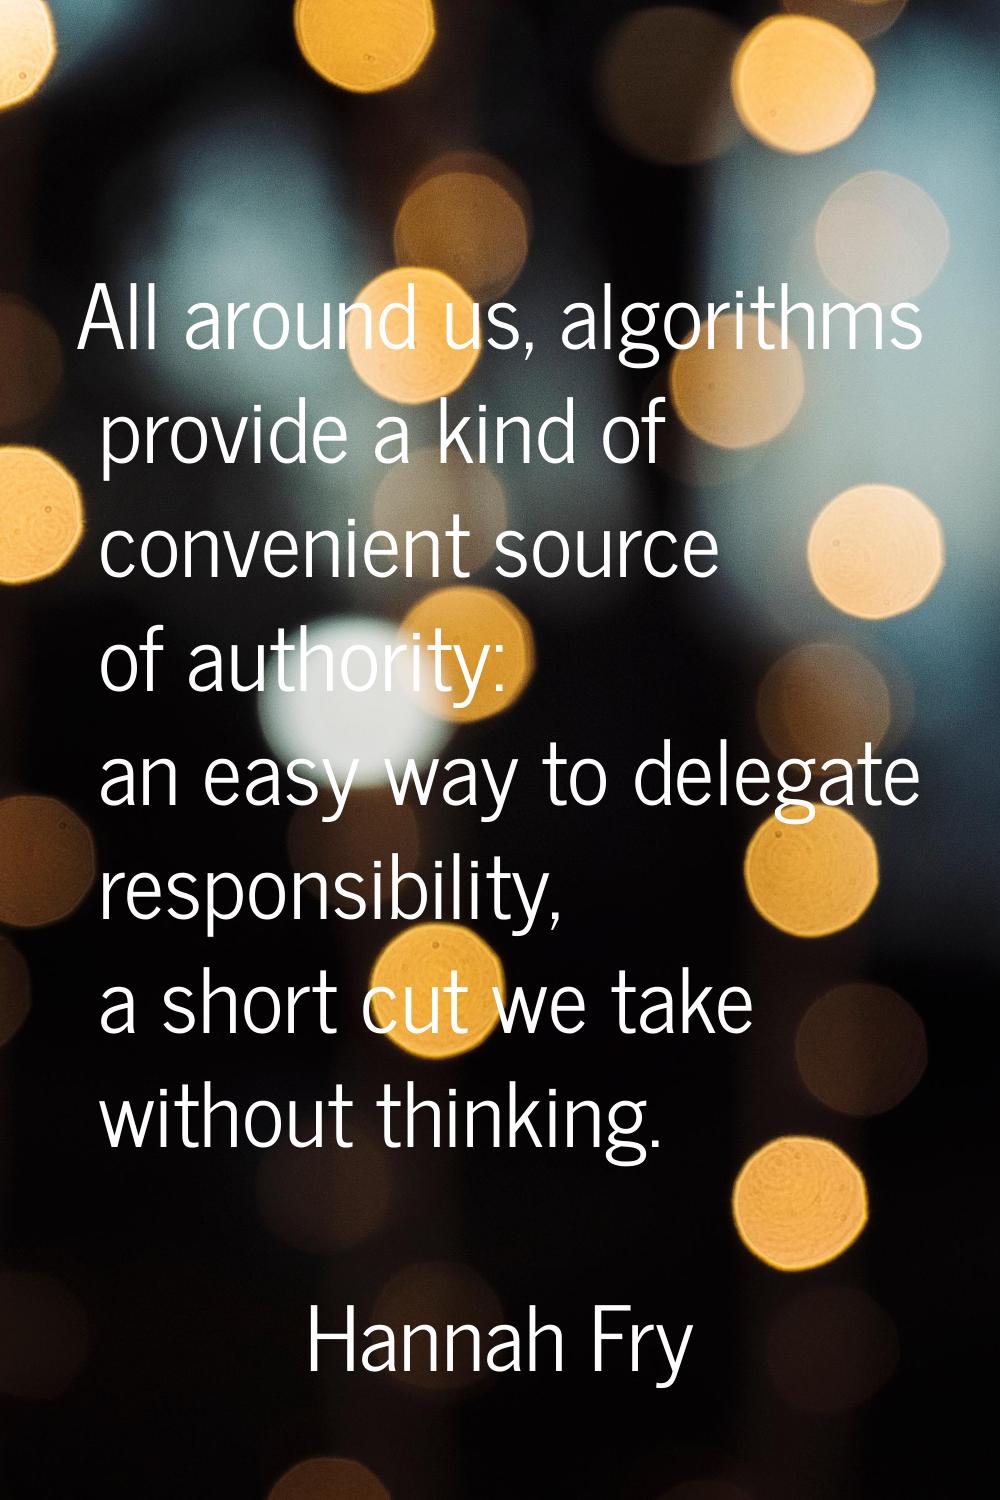 All around us, algorithms provide a kind of convenient source of authority: an easy way to delegate